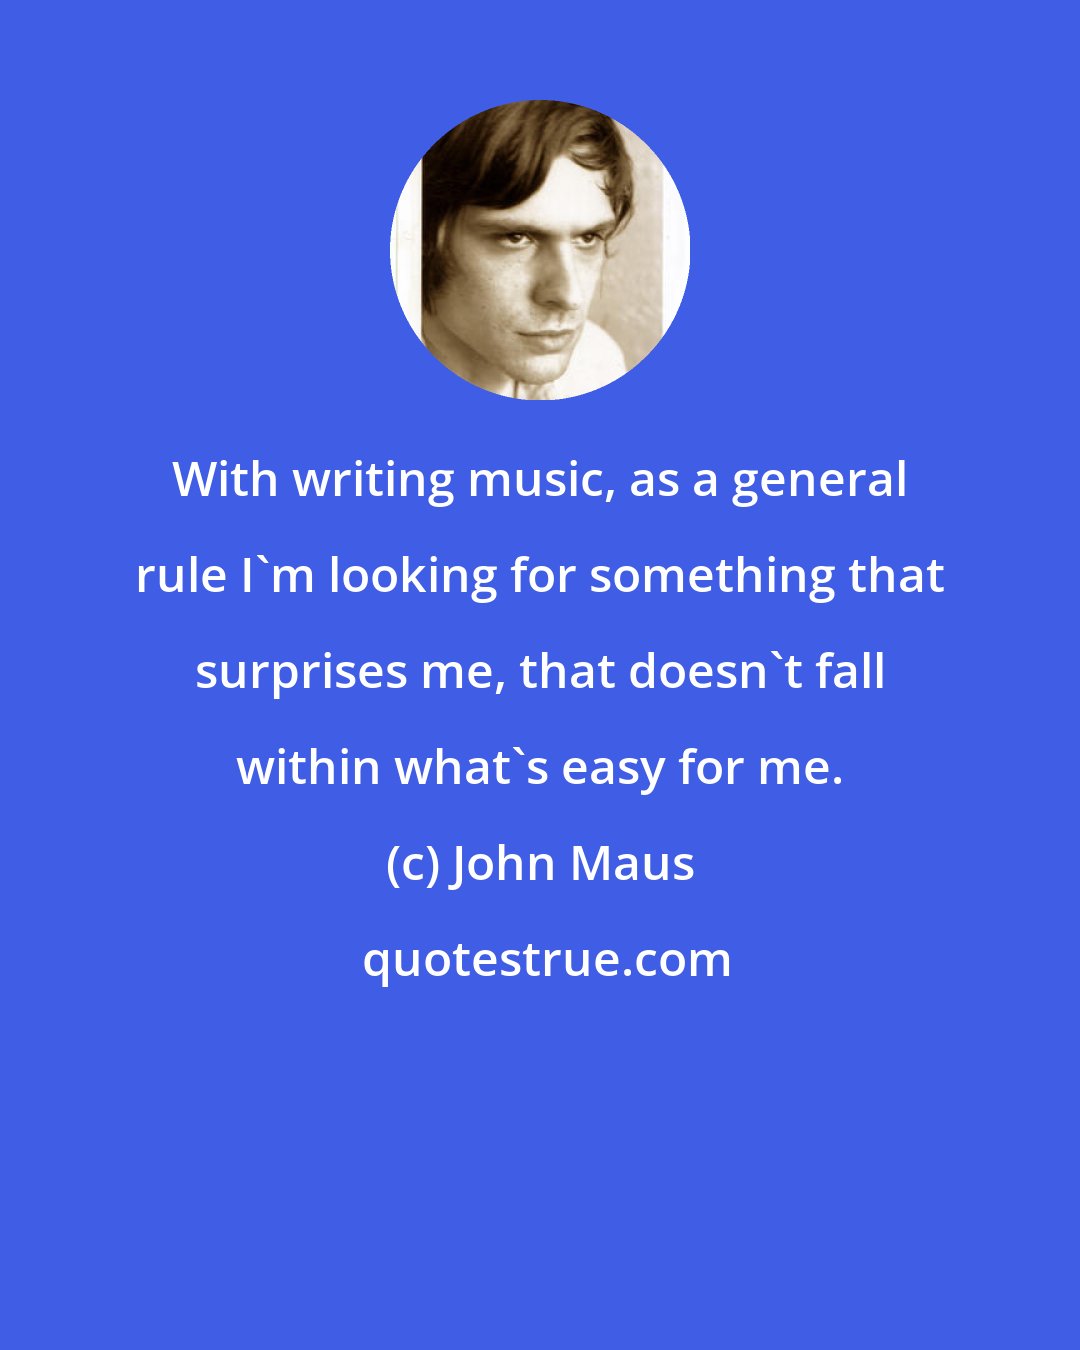 John Maus: With writing music, as a general rule I'm looking for something that surprises me, that doesn't fall within what's easy for me.